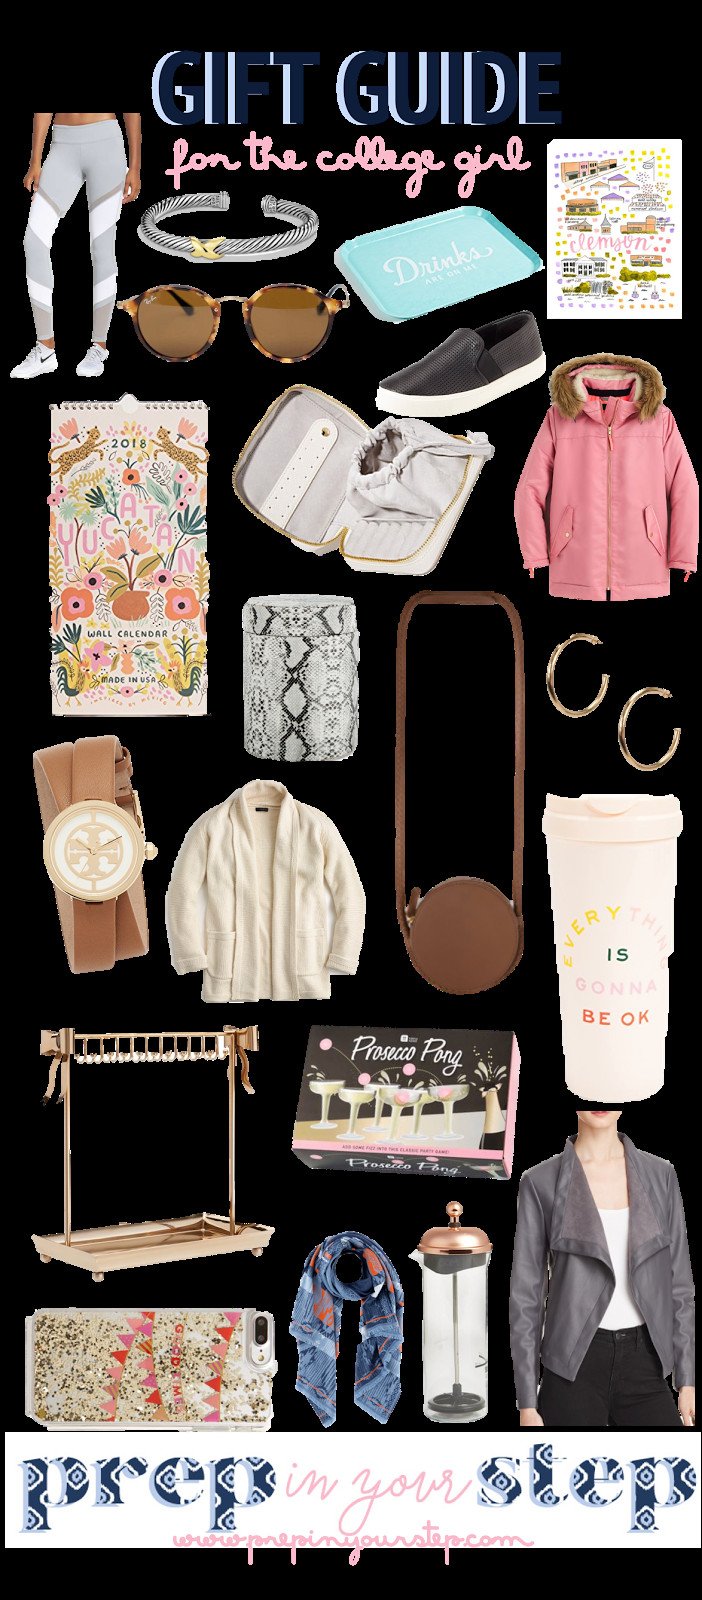 College Girlfriend Gift Ideas
 Prep In Your Step Gift Guide For the College Girl